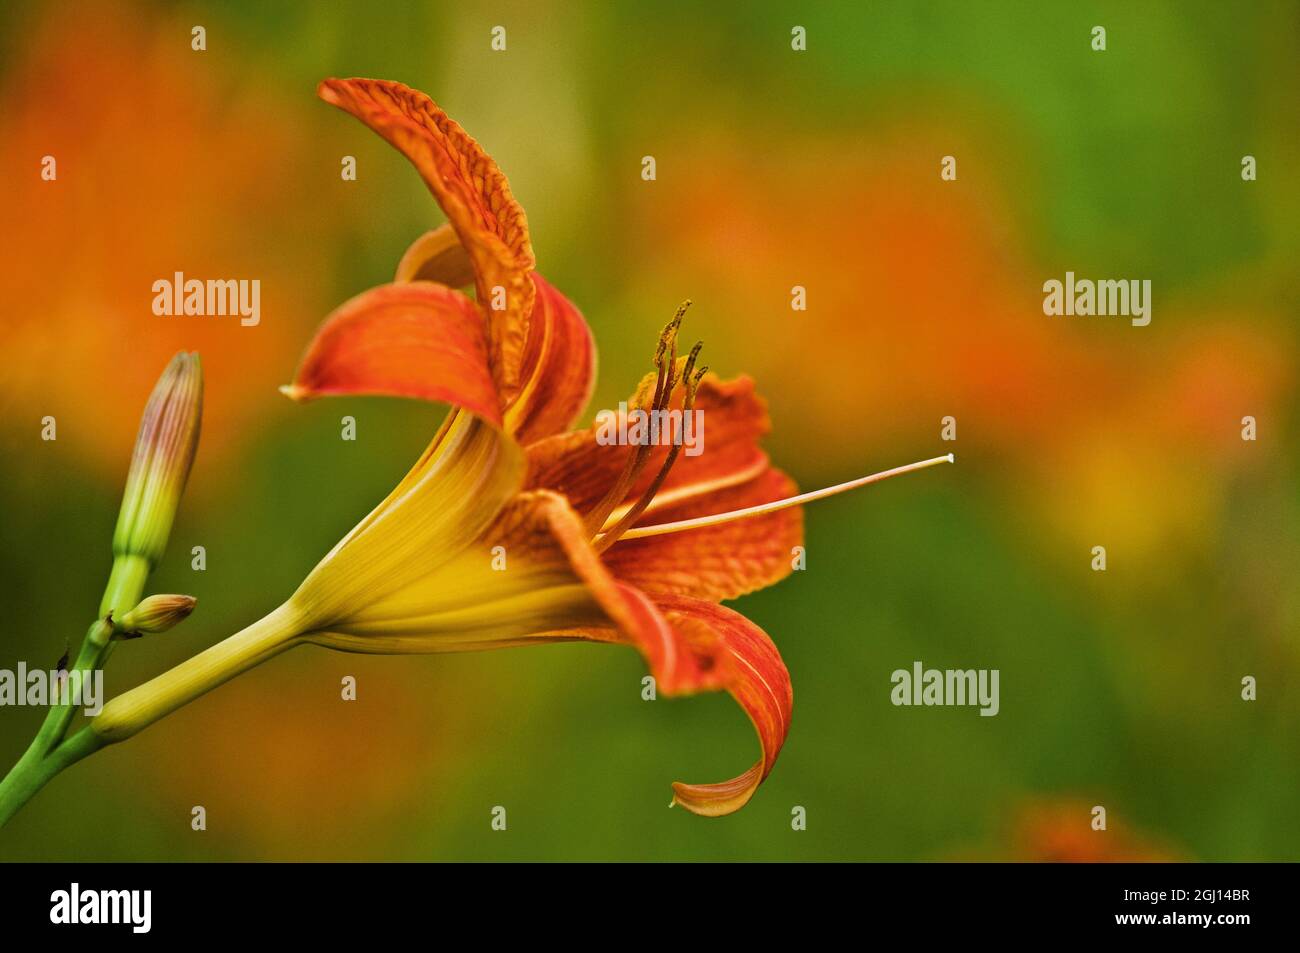 Canada, Ontario, Bayfield Inlet. Wood lily blossom close-up. Stock Photo